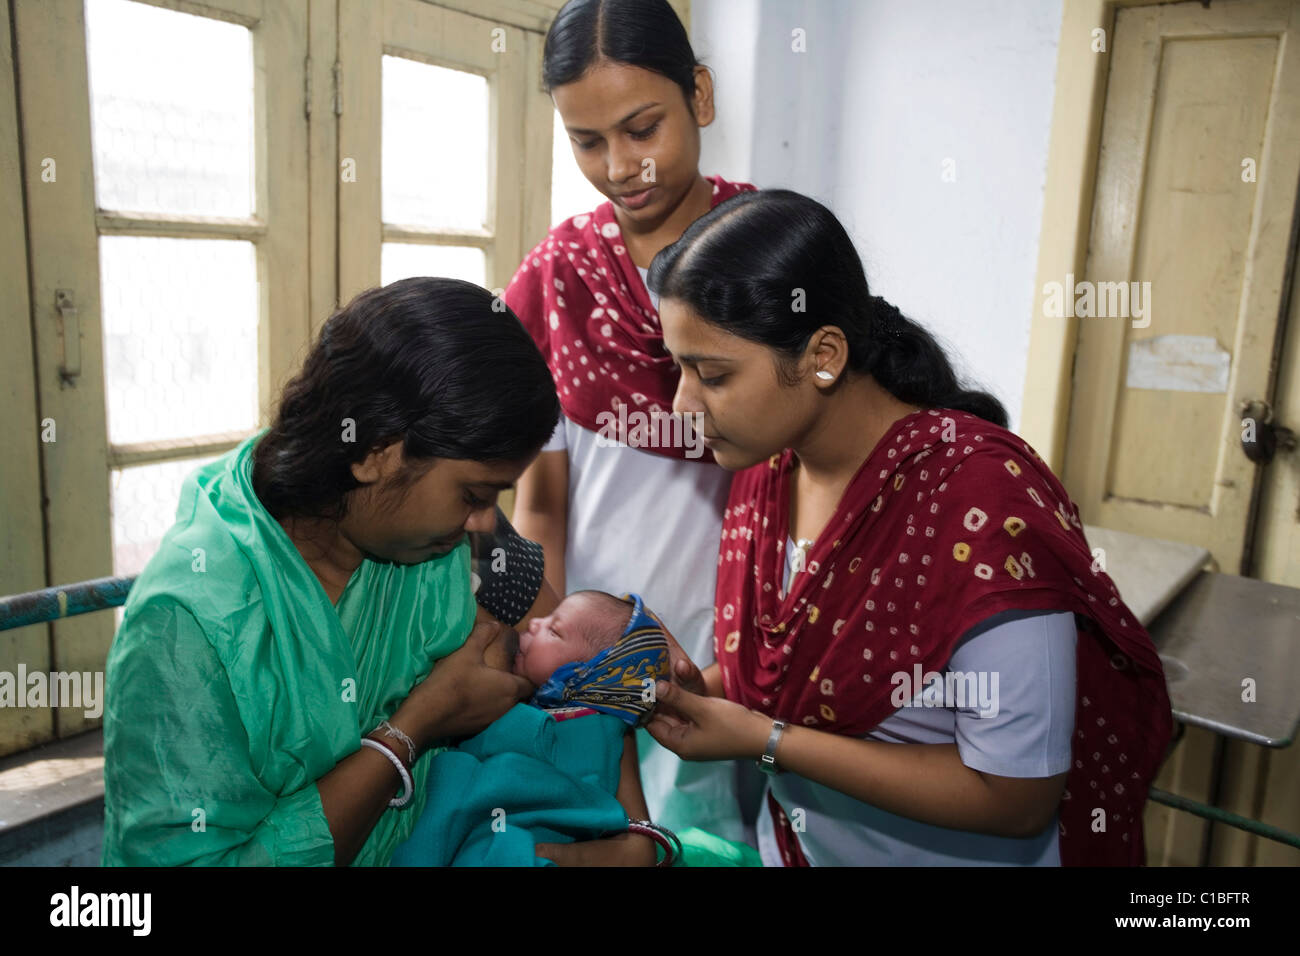 Midwives at Kolkata Nursing College help new mother to breastfeed, India Stock Photo